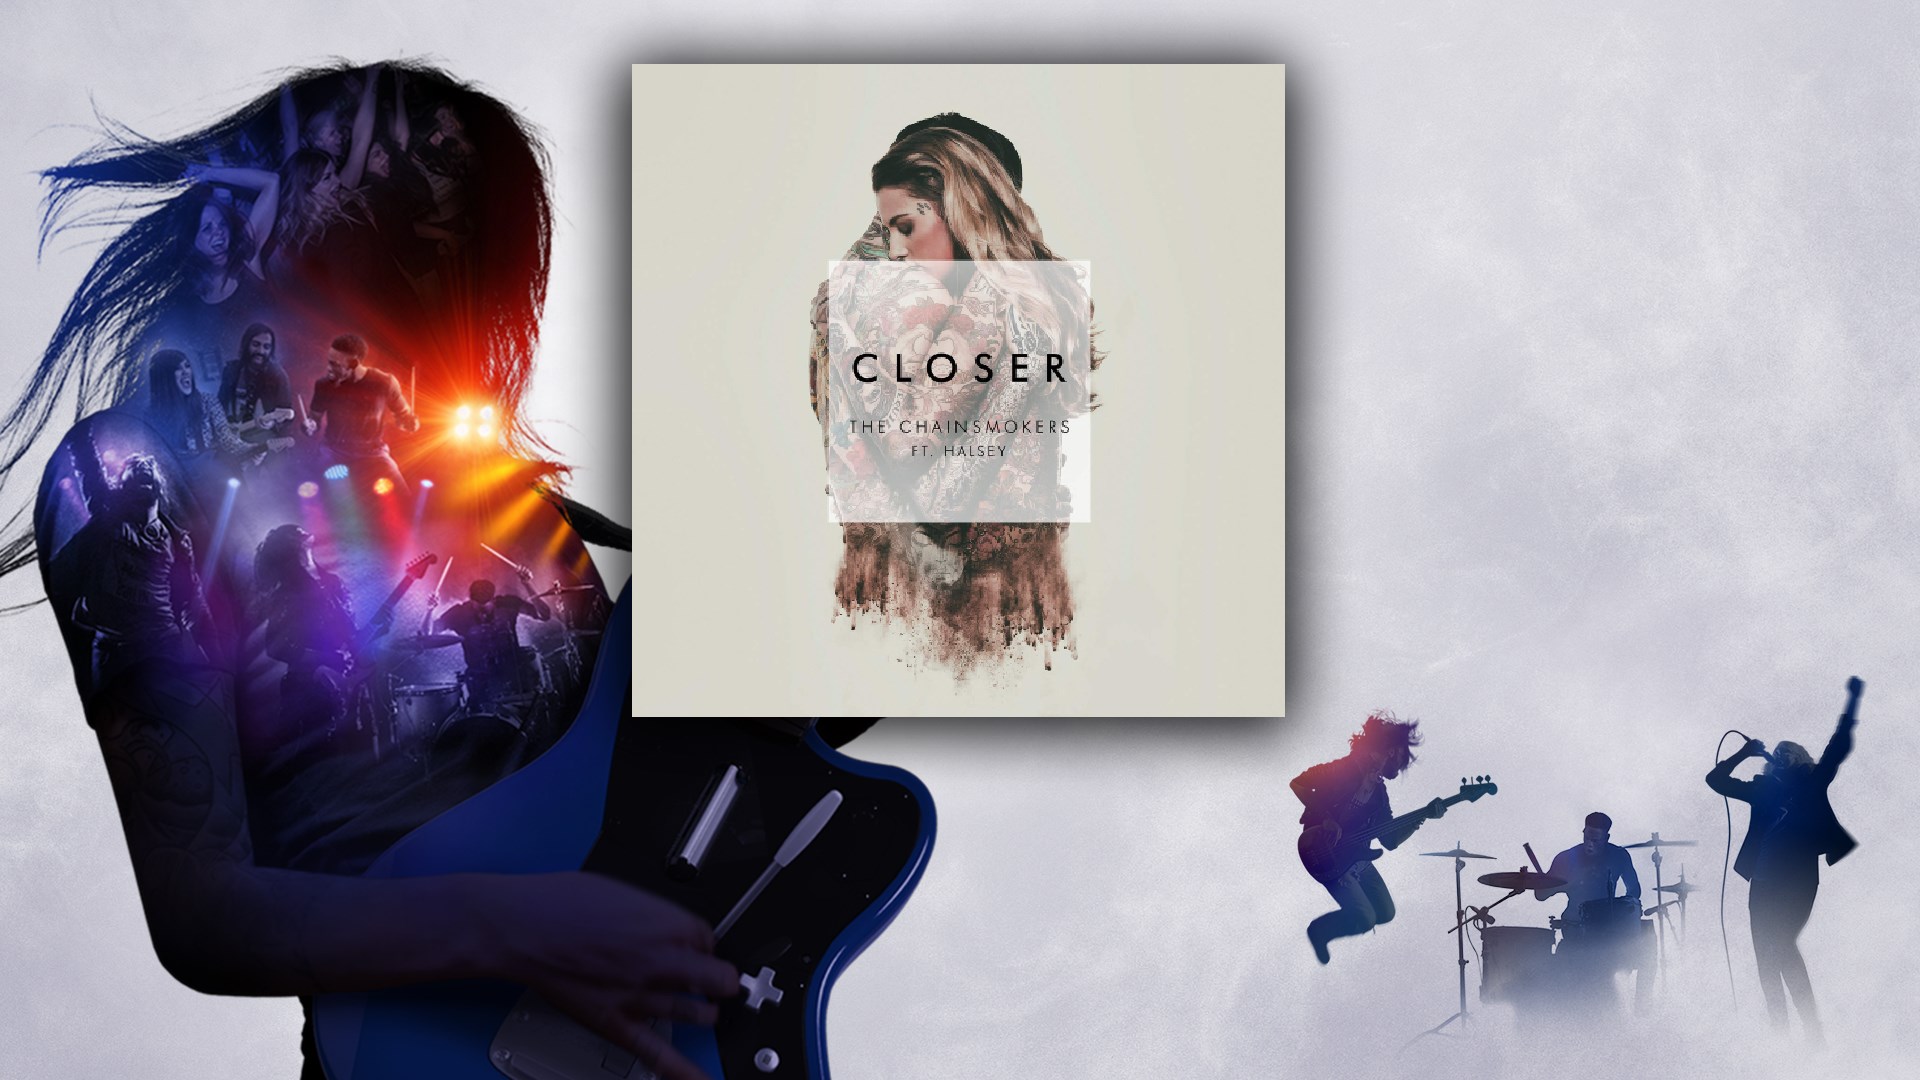 Close the chainsmokers. Halsey Chainsmokers. Closer the Chainsmokers. The Chainsmokers feat. Halsey. Halsey closer.